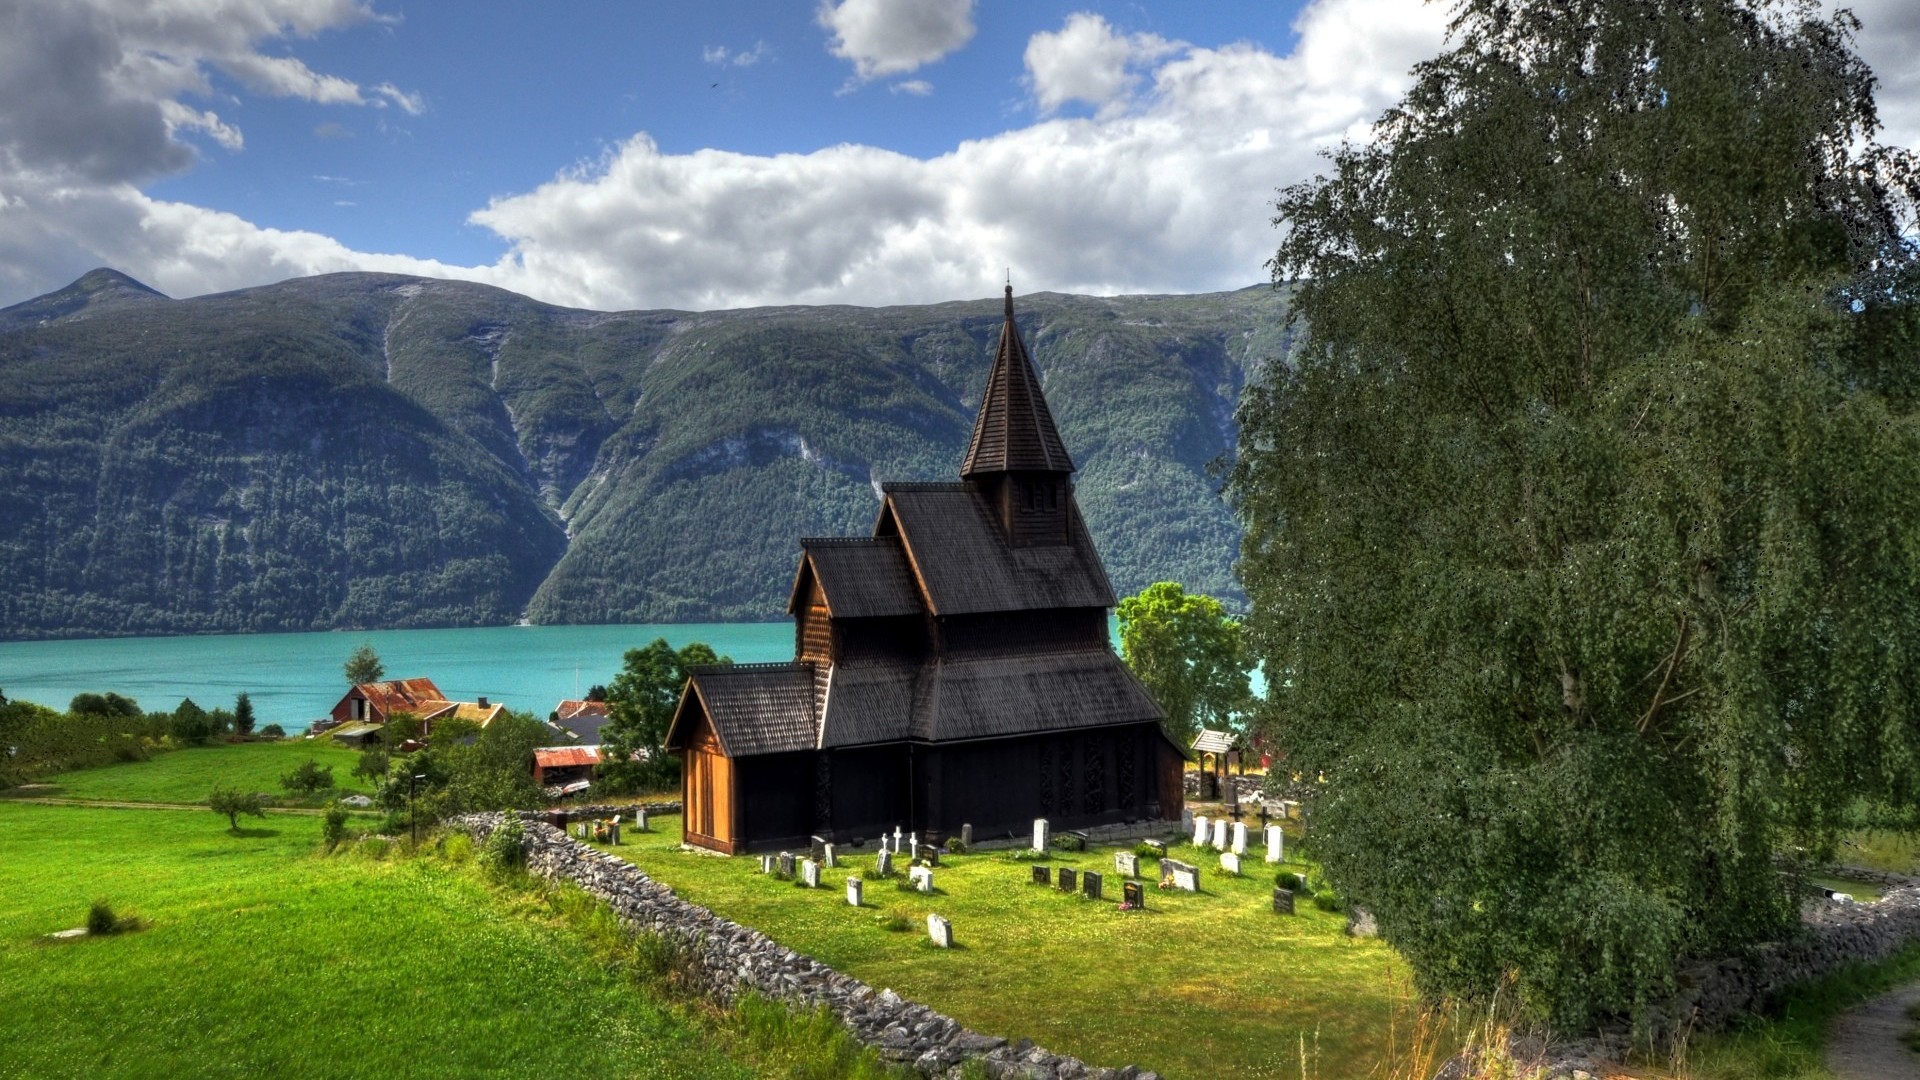 landscapes_norway_europe_church_1920x1080_23891